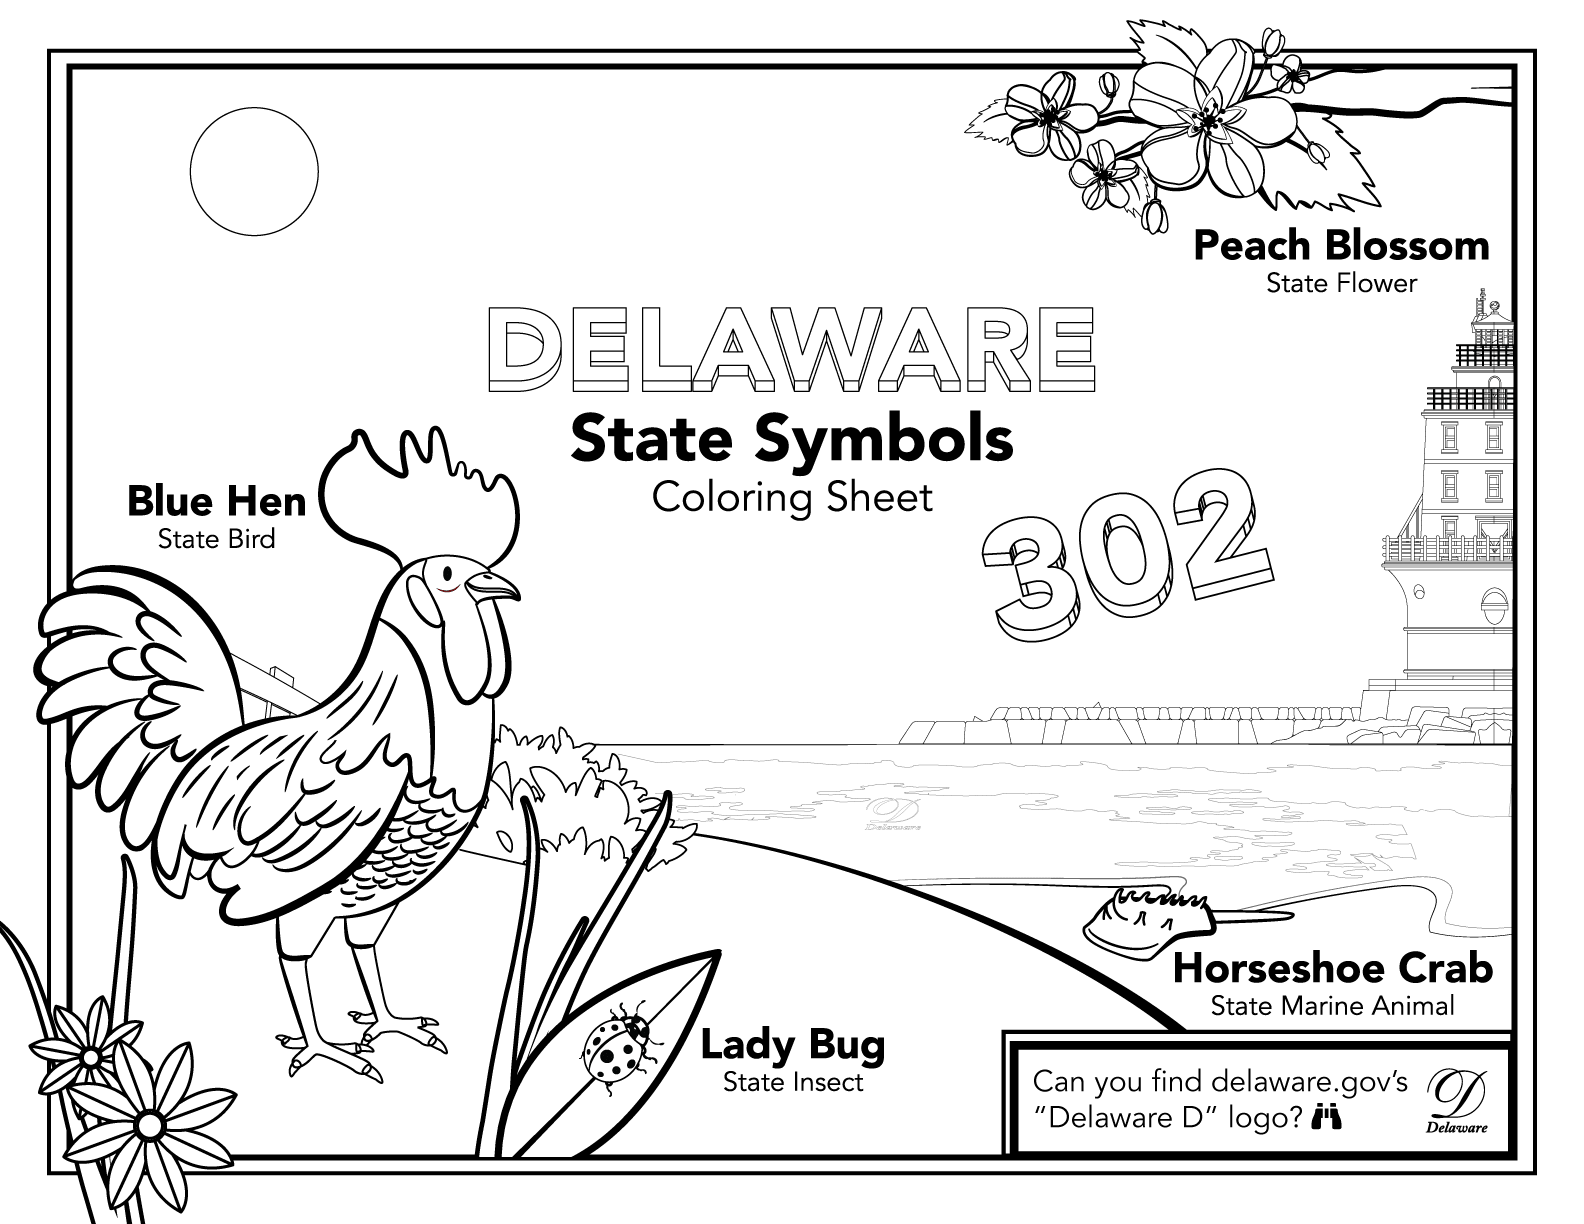 Delaware coloring page